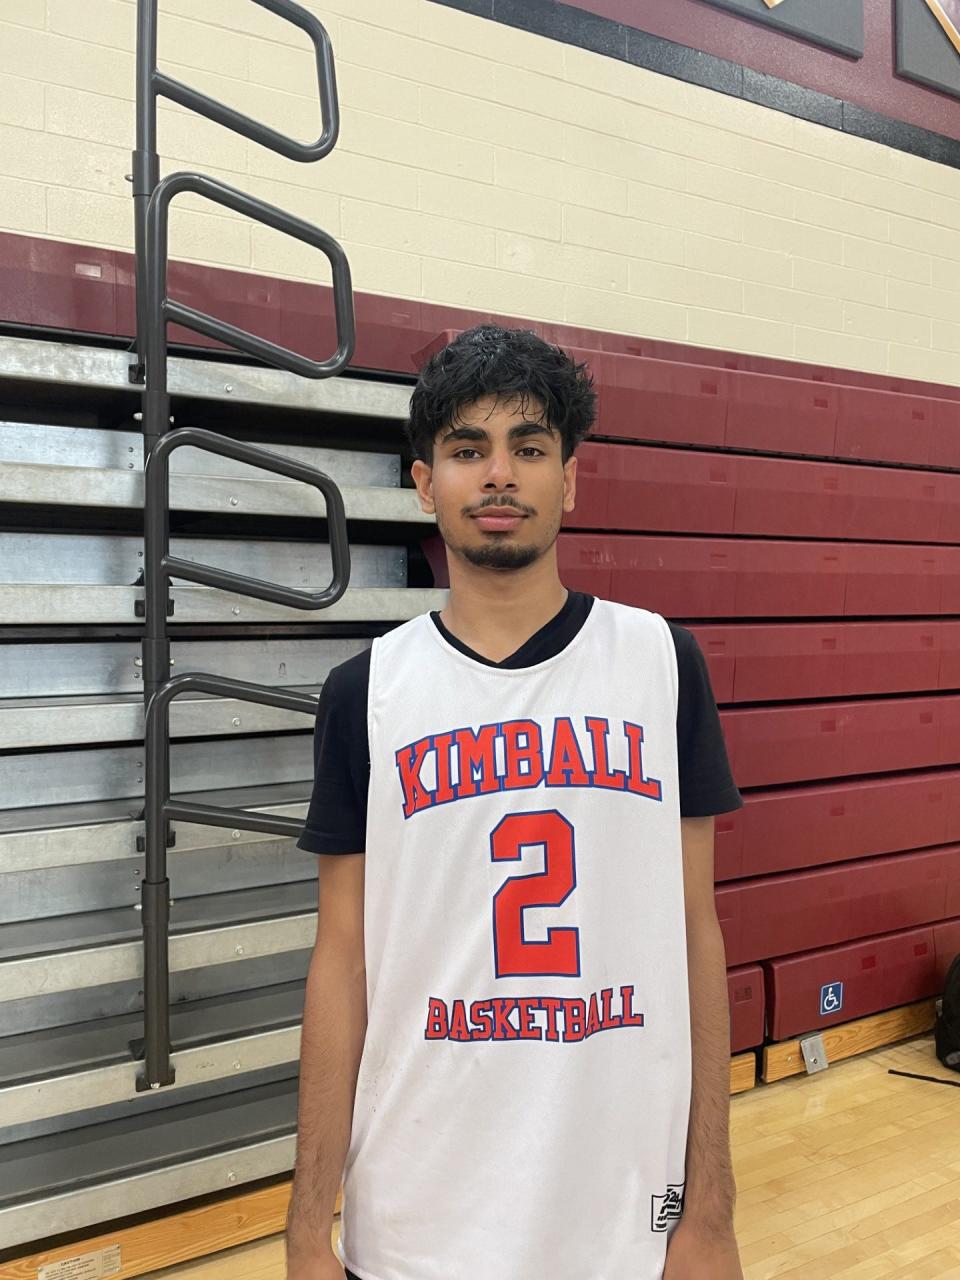 Madhav Asija of Kimball basketball poses for a photo after a game at Edison High School for the Modesto Christian Summer Classic.